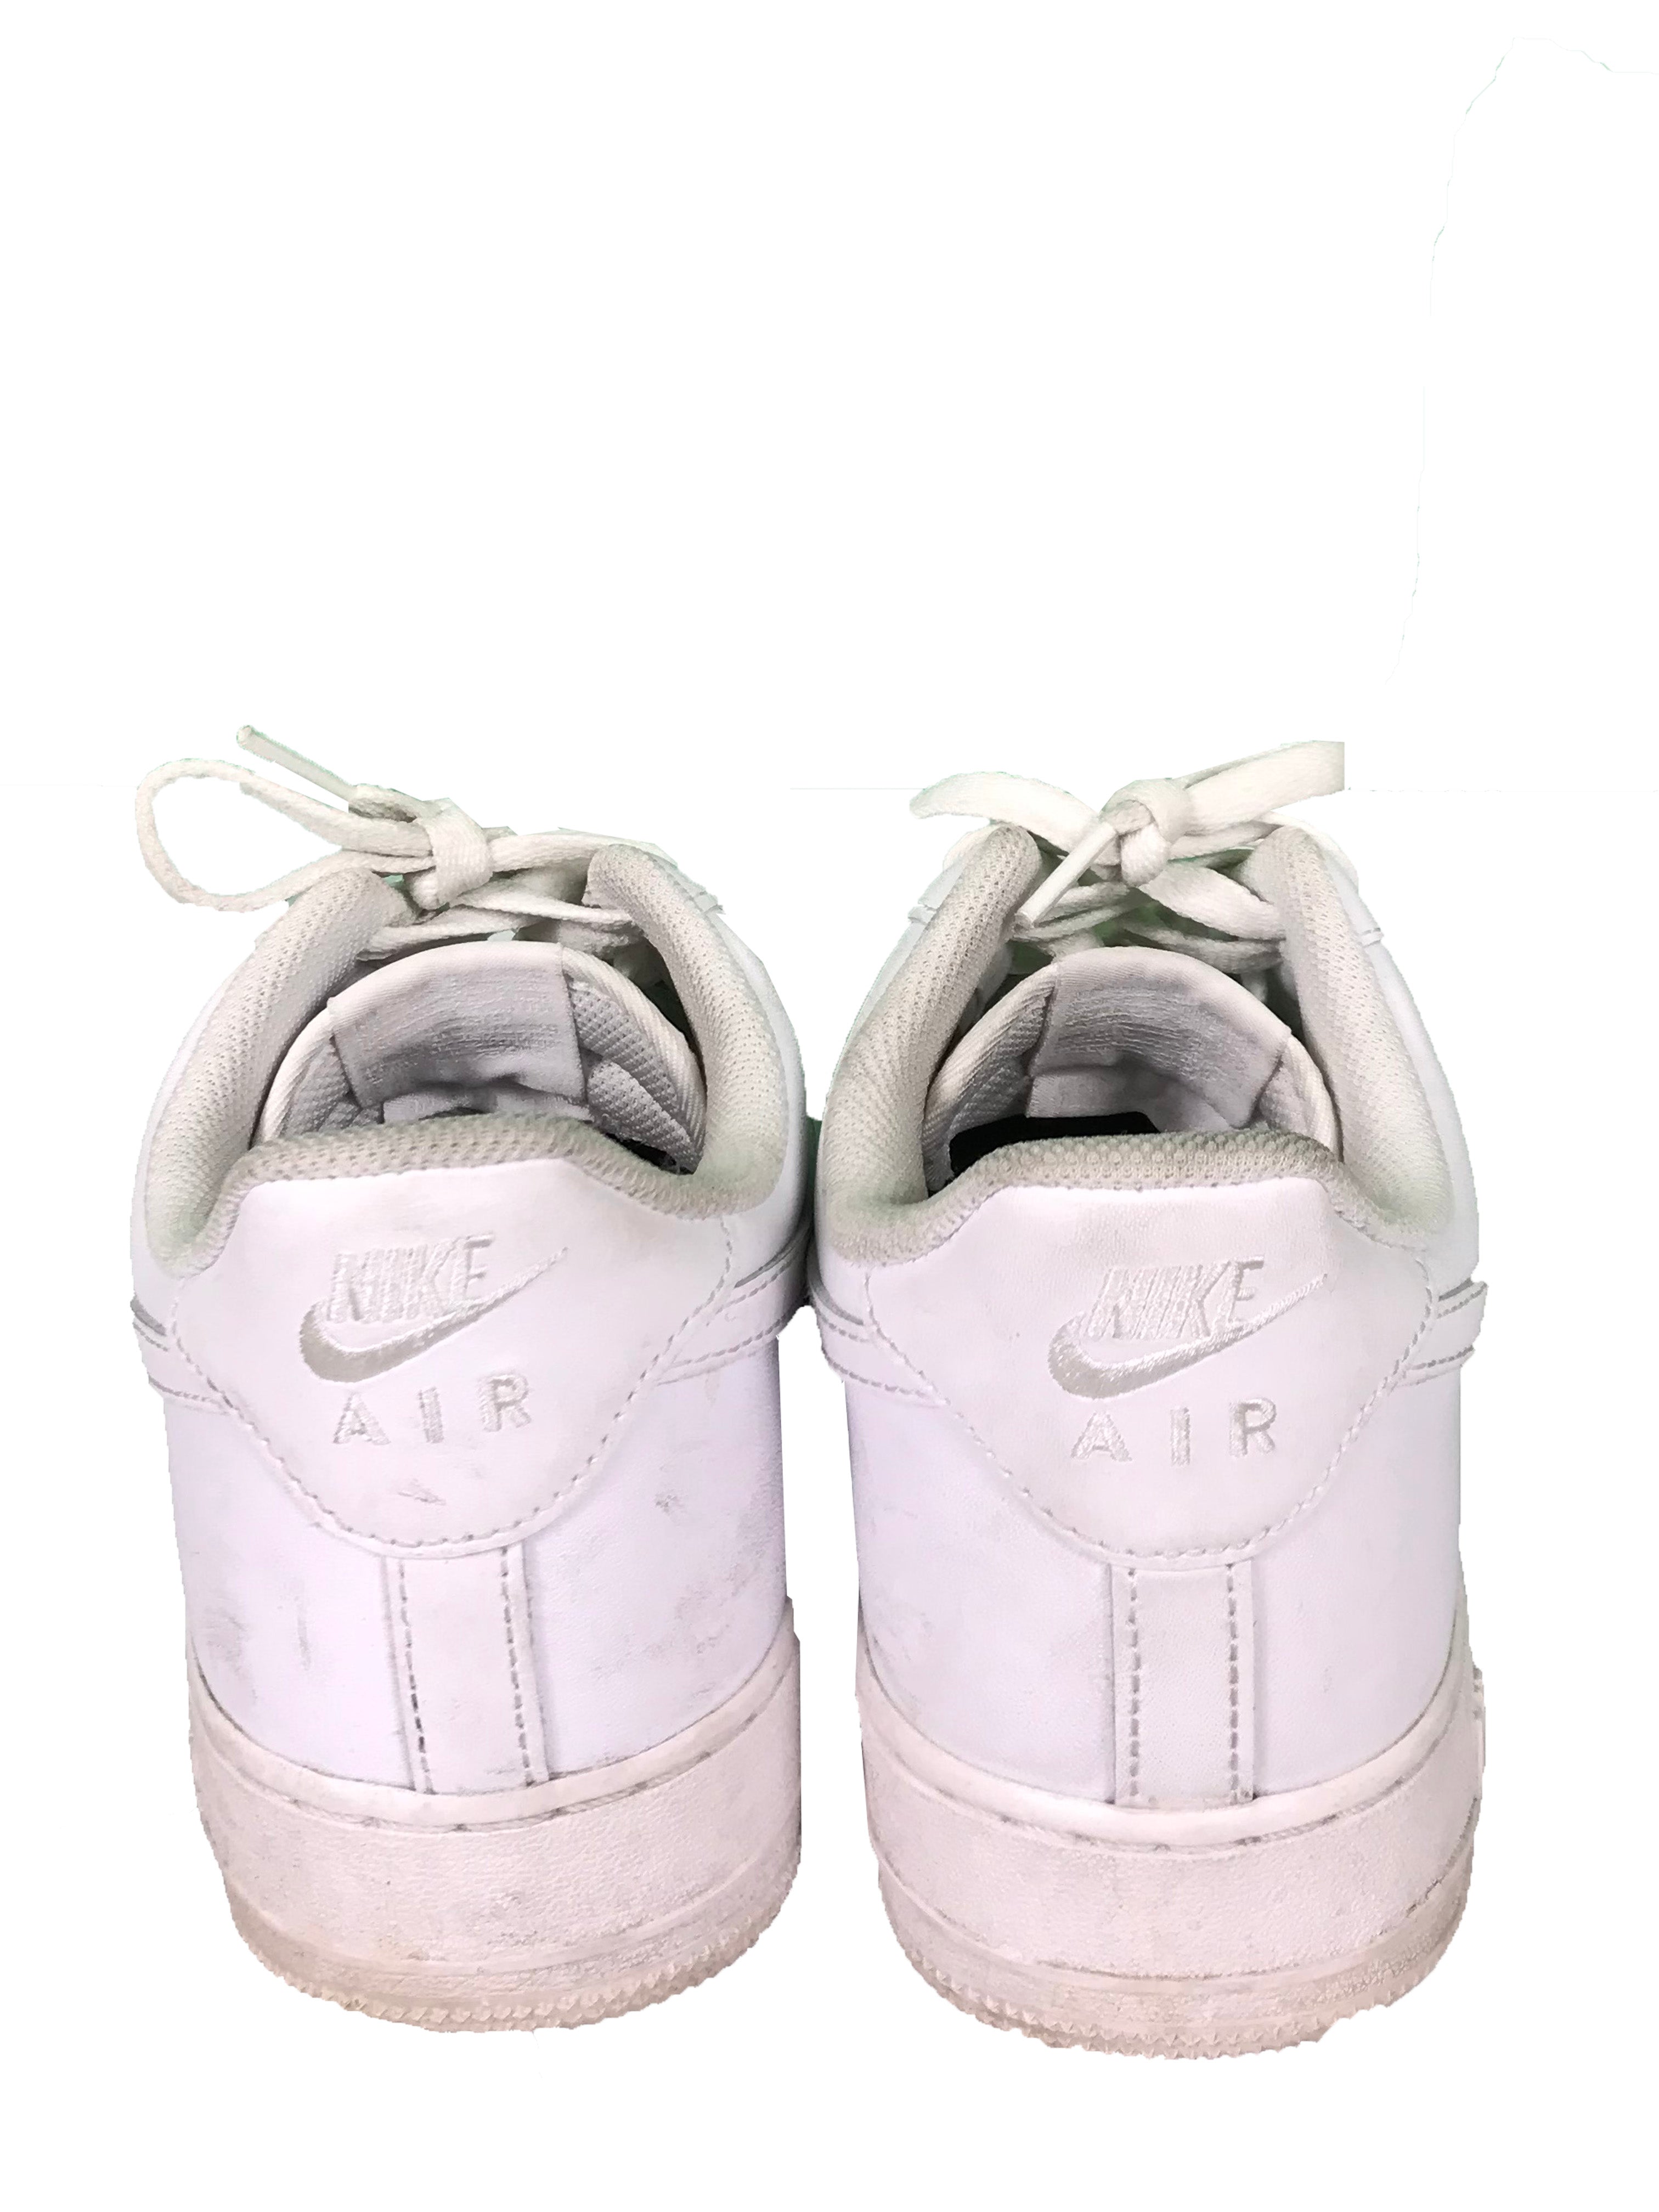 Nike White Air Force One Sneakers Men's Size 11.5